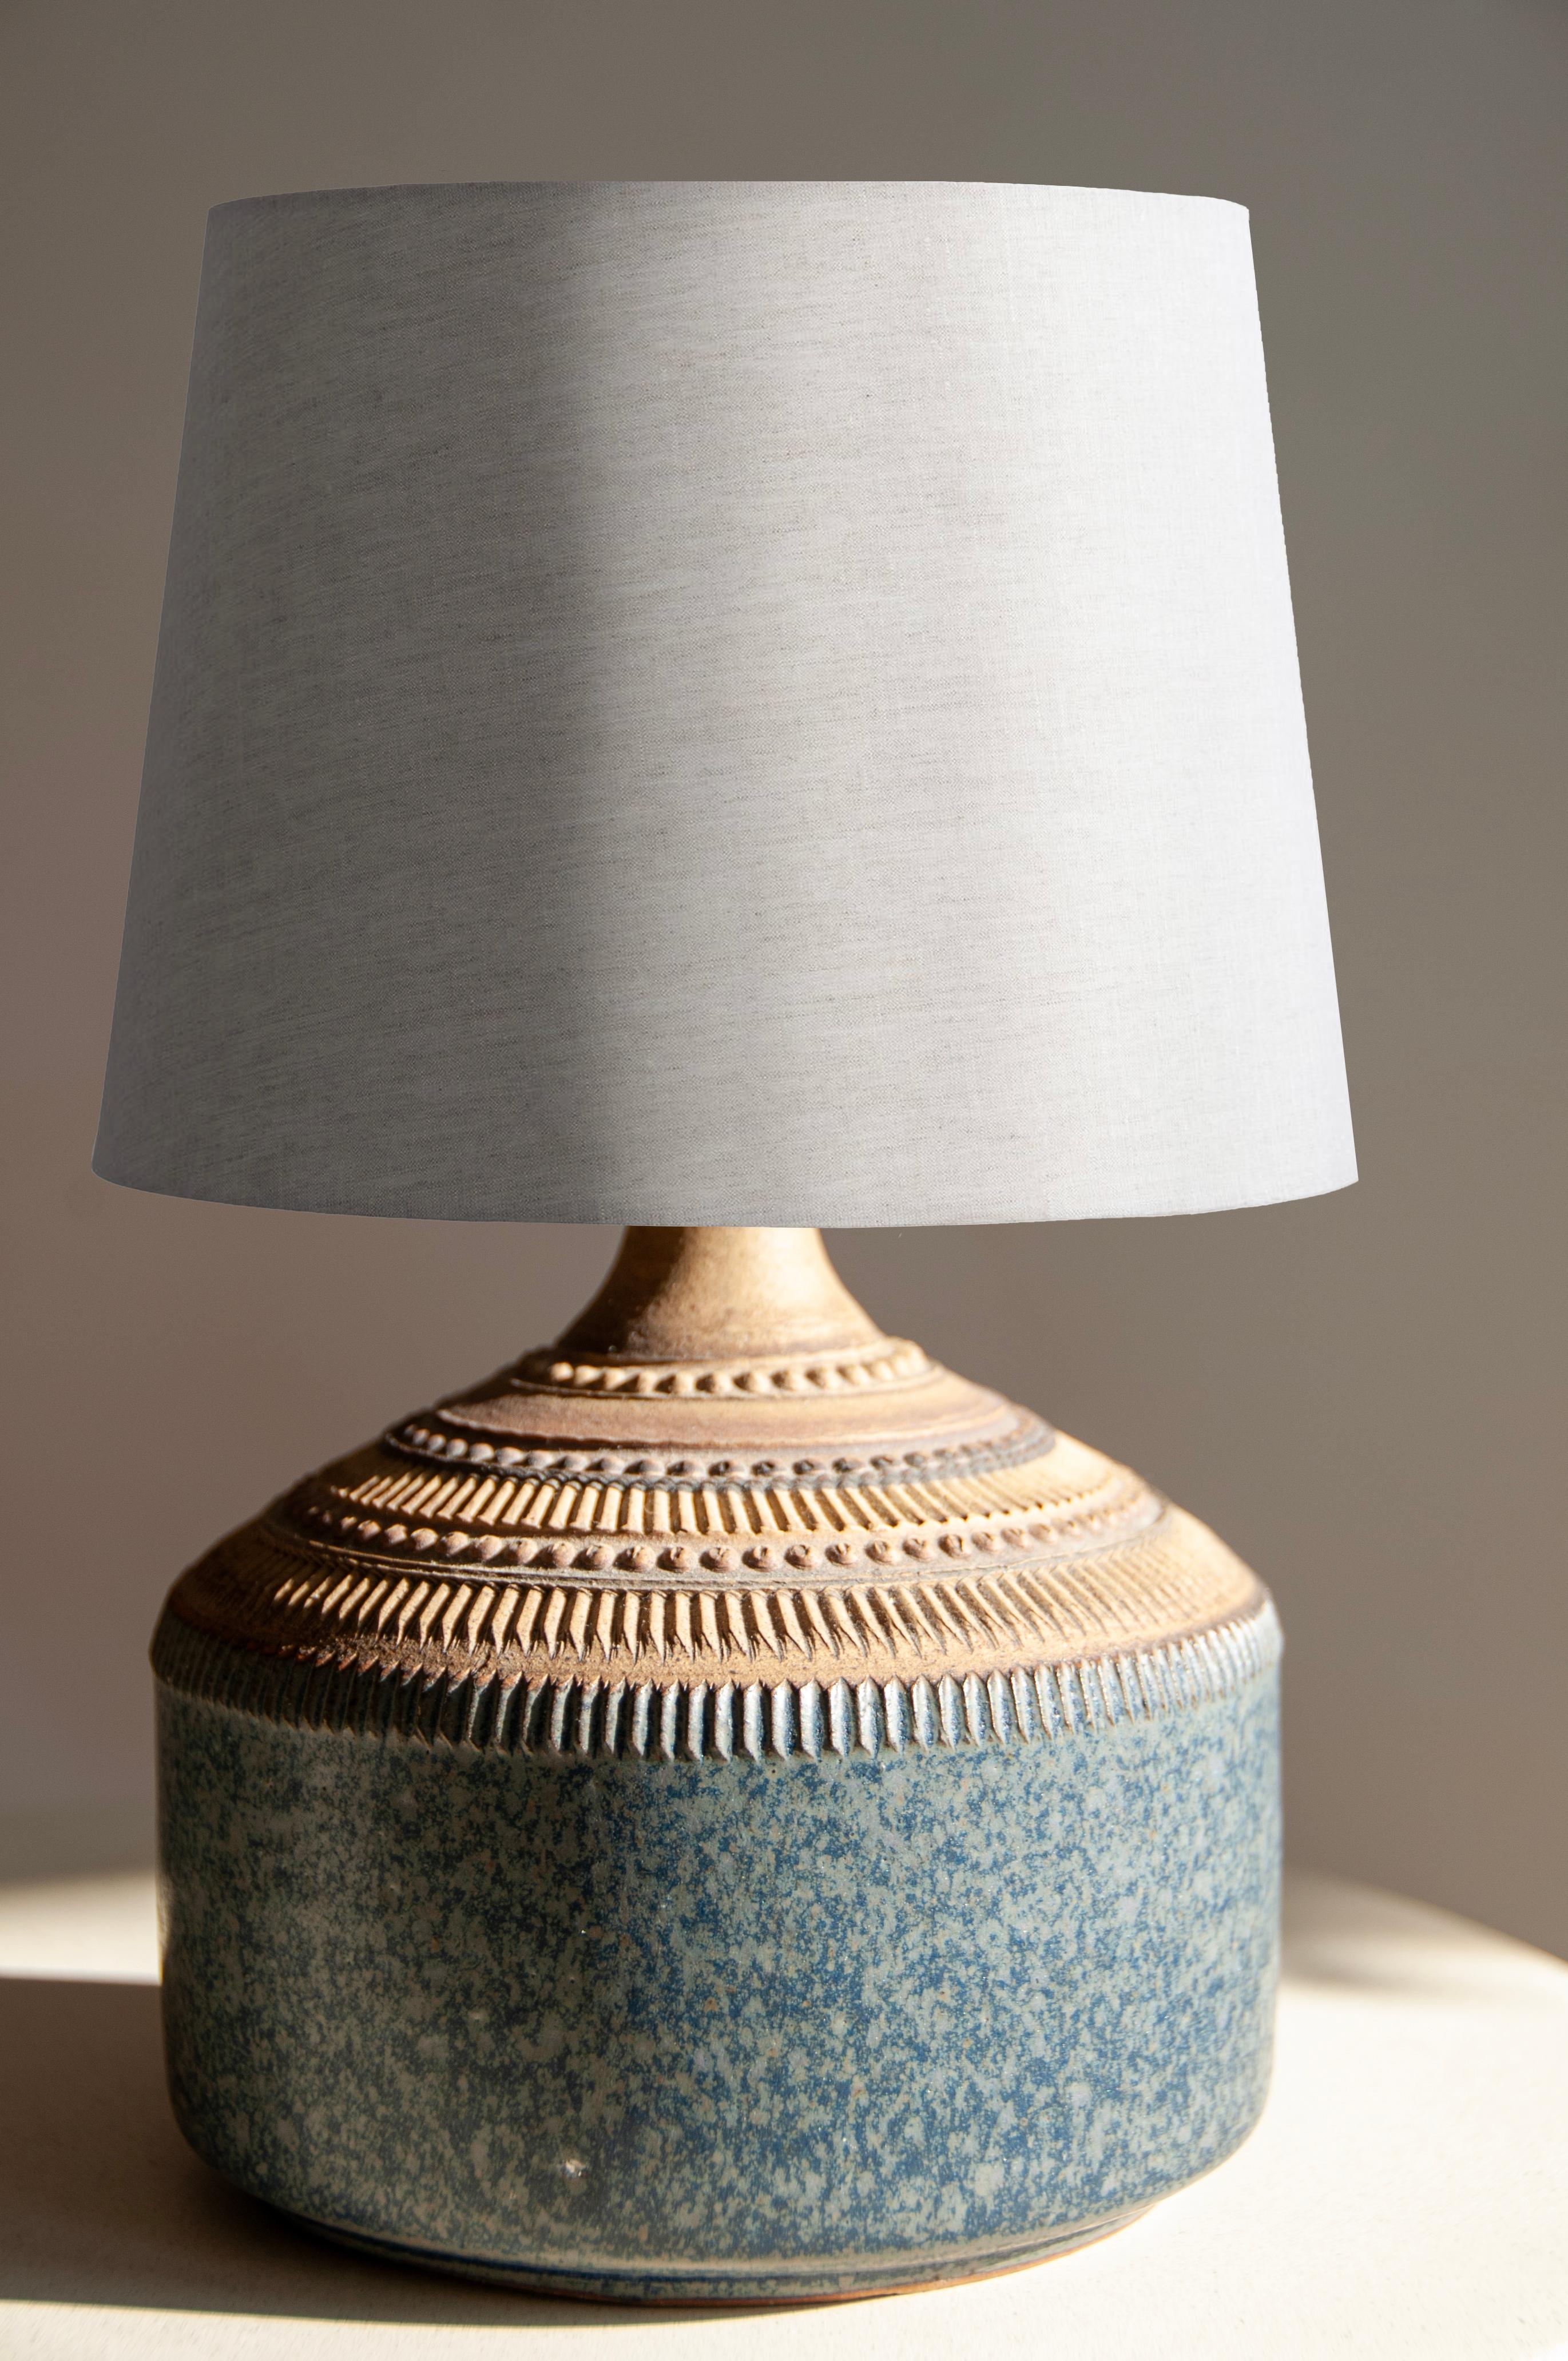 Explore an exceptional piece of vintage lighting with this handmade ceramic lamp from the iconic manufacturer Klase Keramik Höganäs, crafted with love and craftsmanship in the 1960s!

Product Description:
This vintage ceramic lamp is a vivid